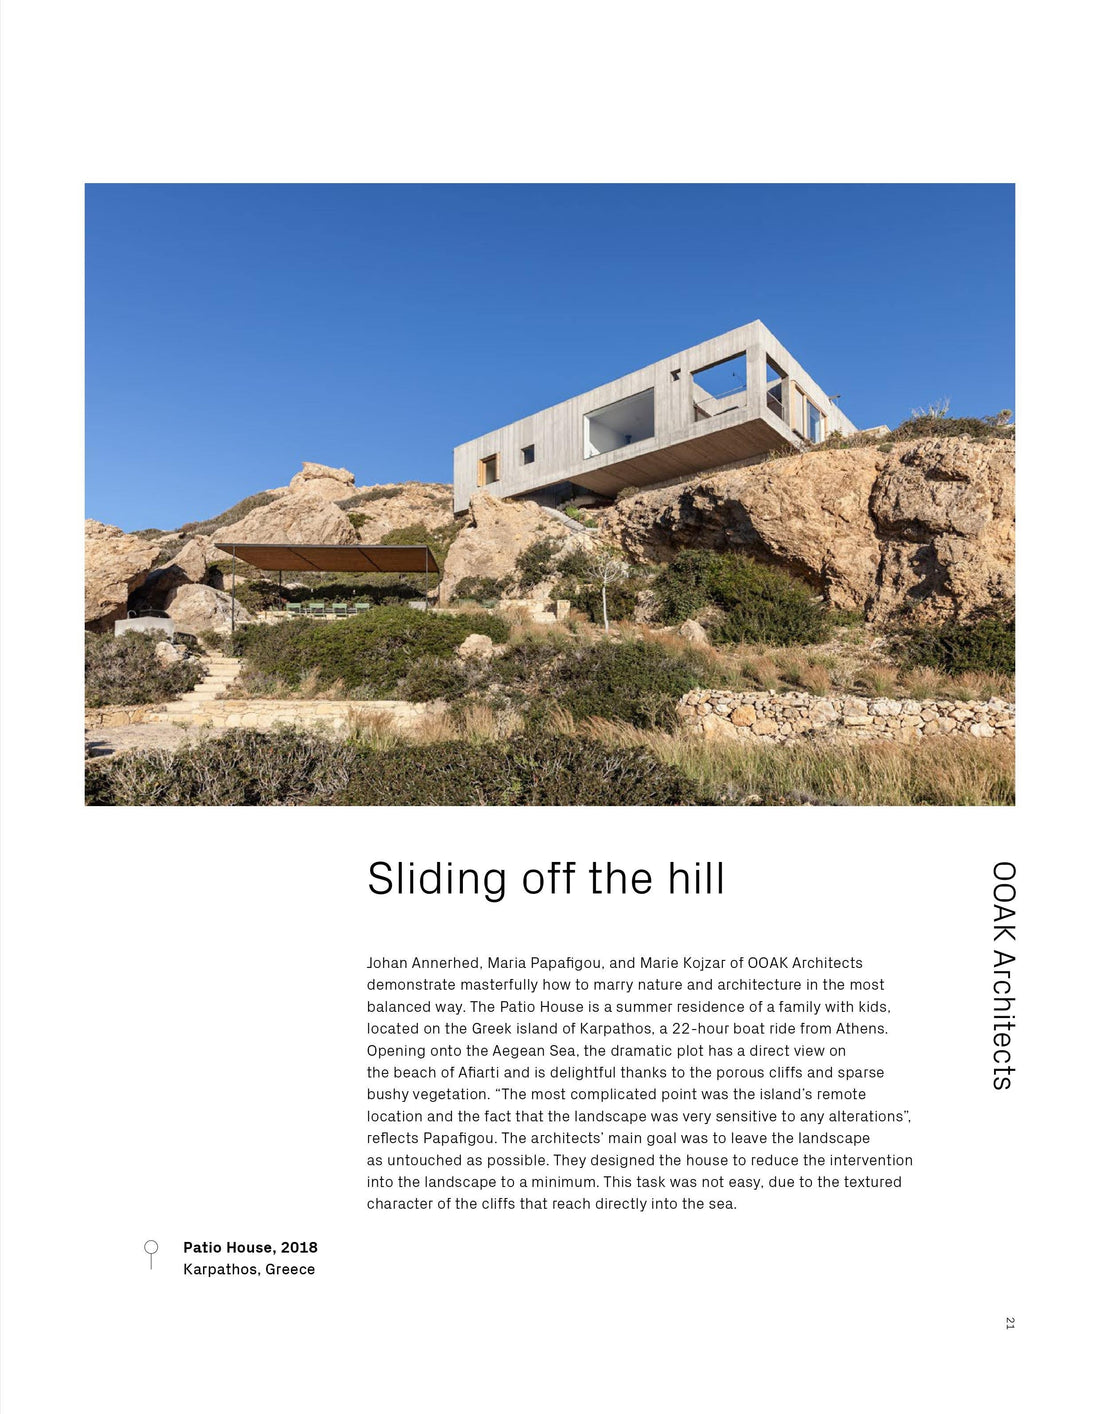 Living On The Edge: Houses on Cliffs